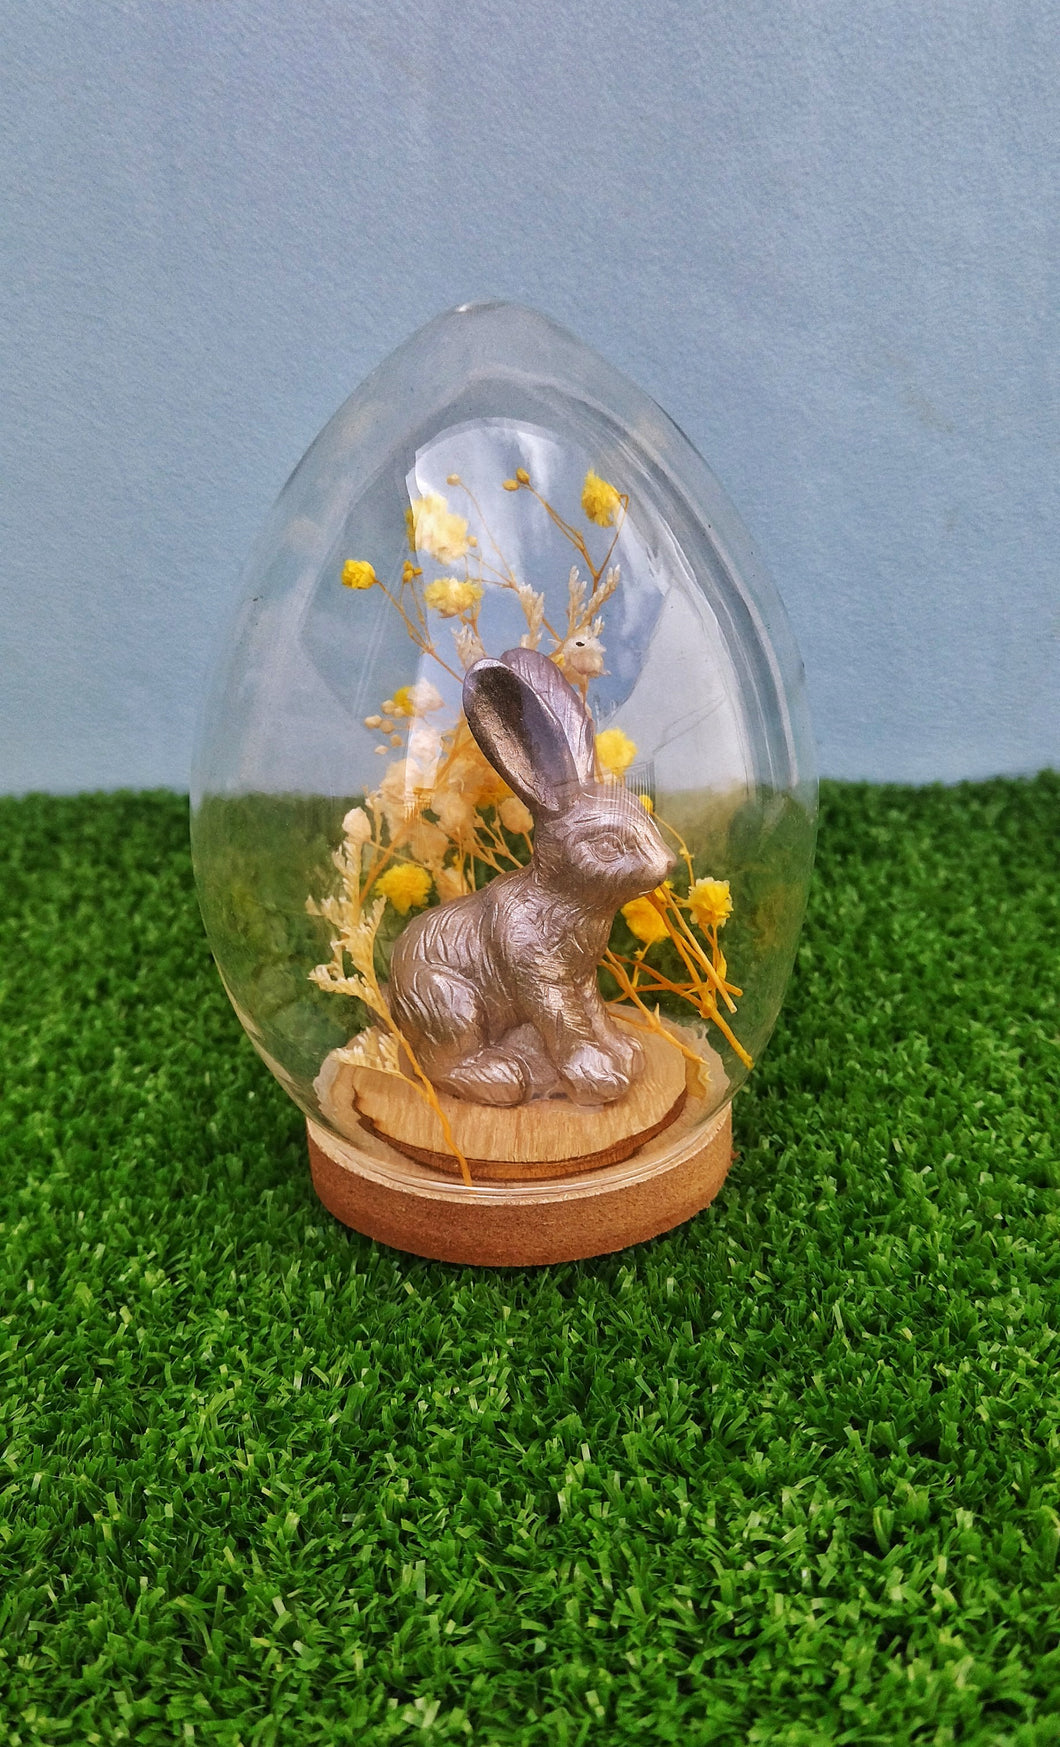 Mini Diorama With Bunny Ornament And Dried Flowers